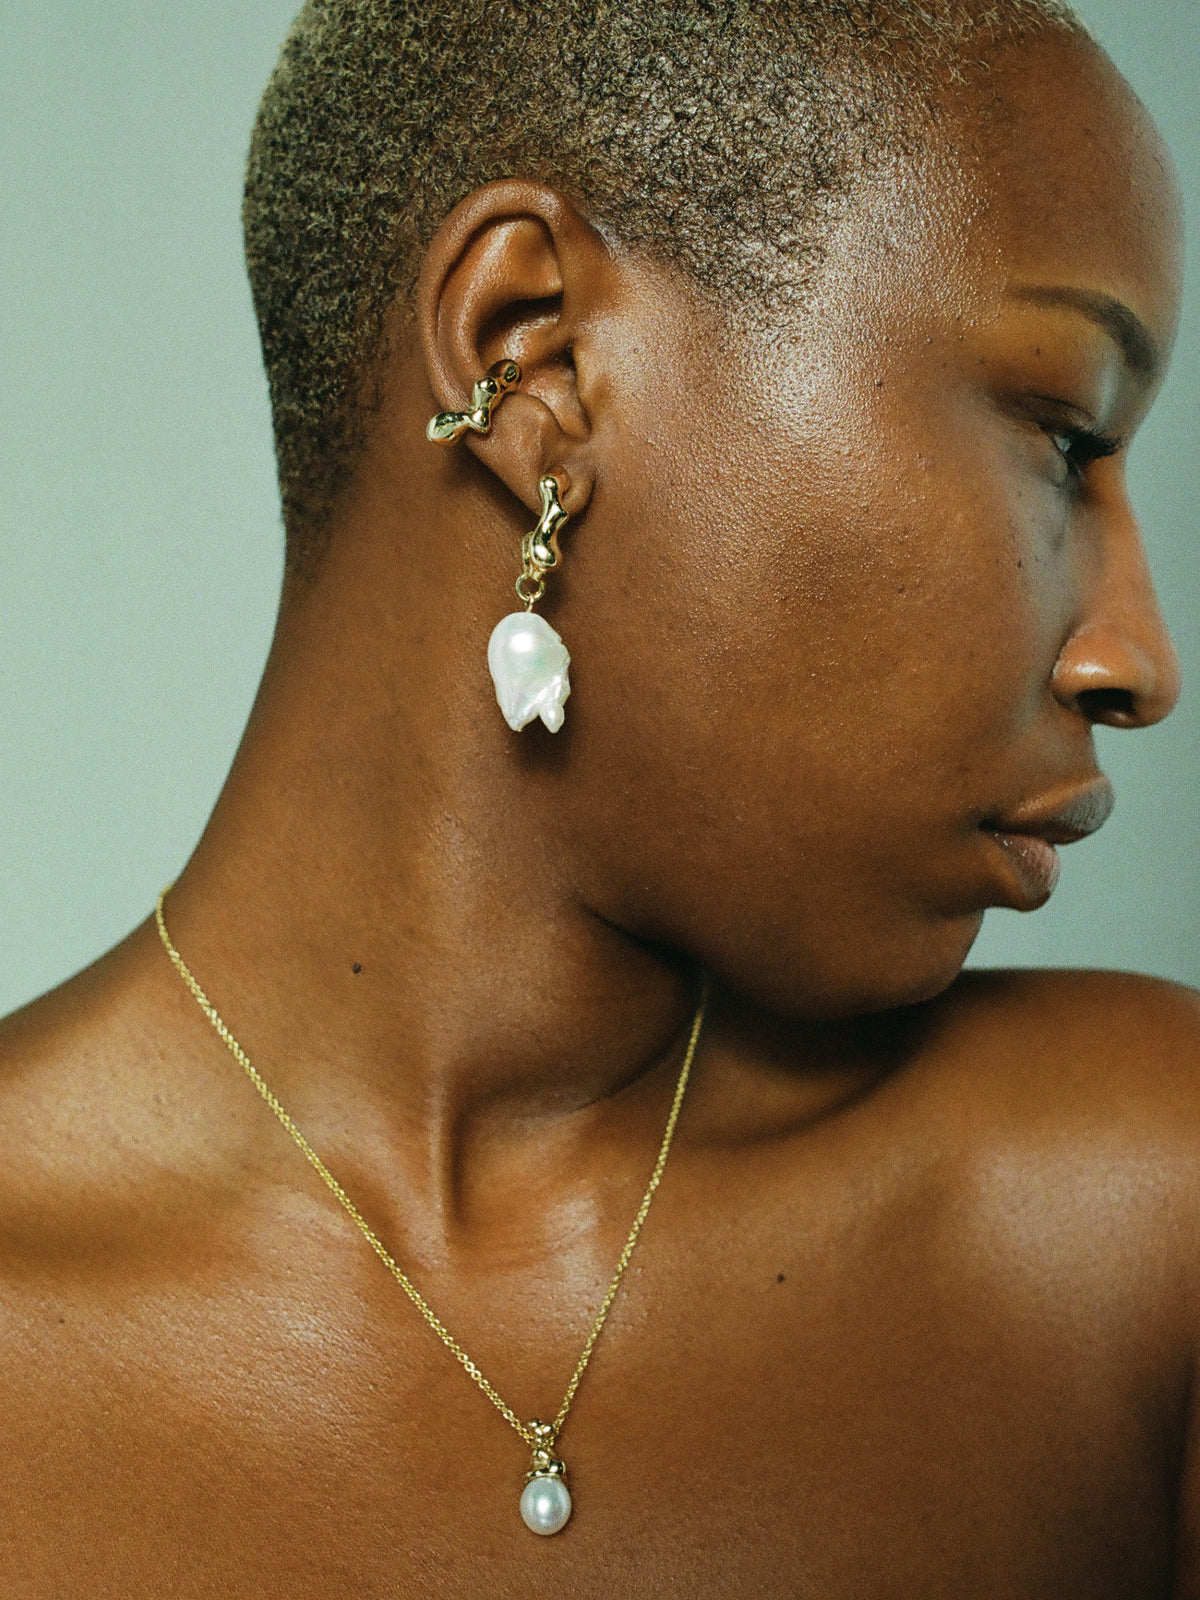 FARIS SEEP BAROQUE Drops in 14k Gold Plate styled on female model, styled with SEEP Ear Cuff in 14k Gold Plate, and SOPHIA Necklace in 14k Gold Plate